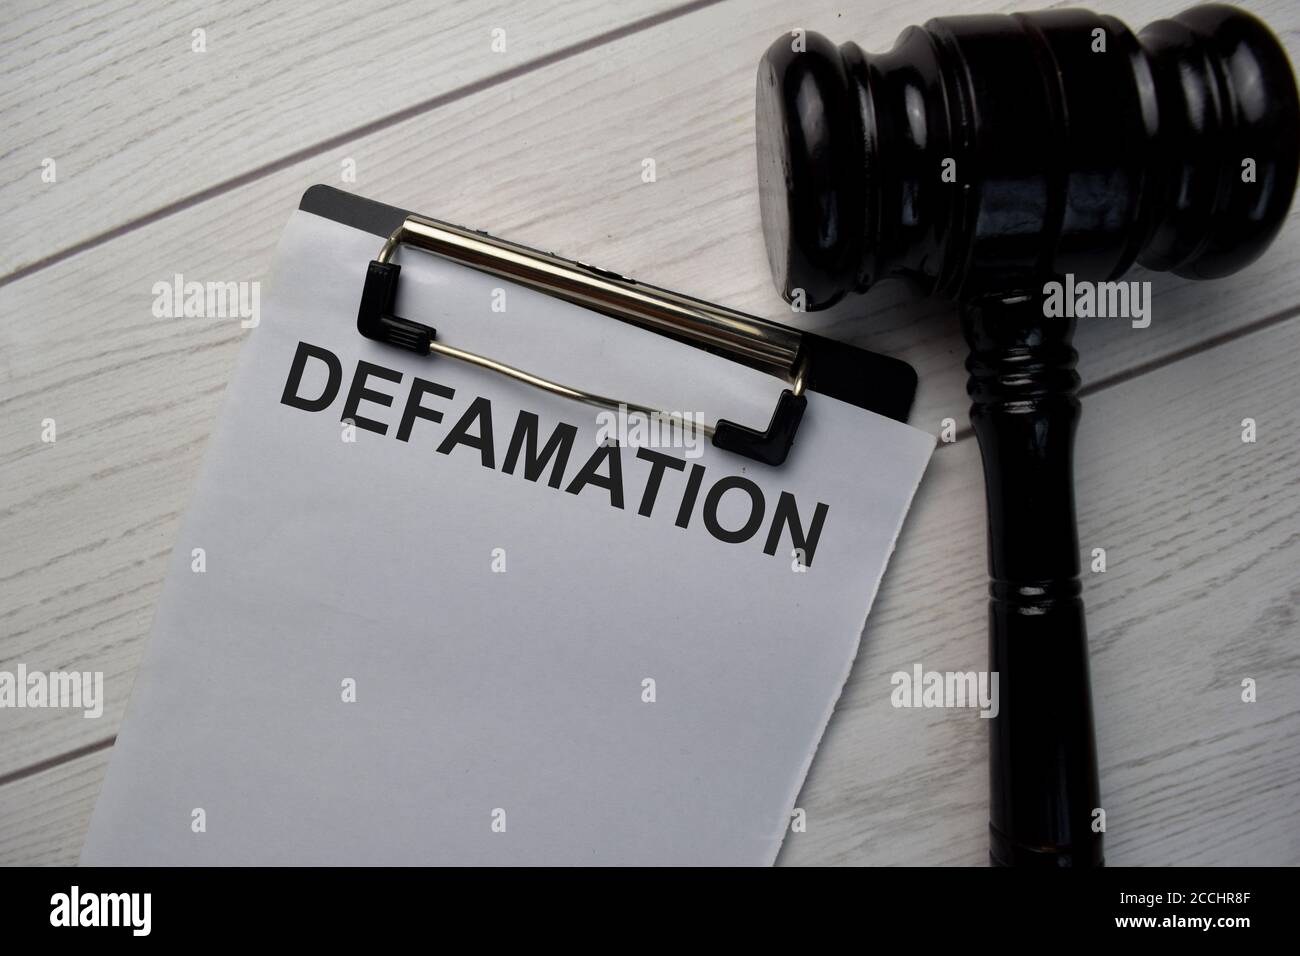 Defamation text write on a paperwork and gavel isolated on office desk. Stock Photo